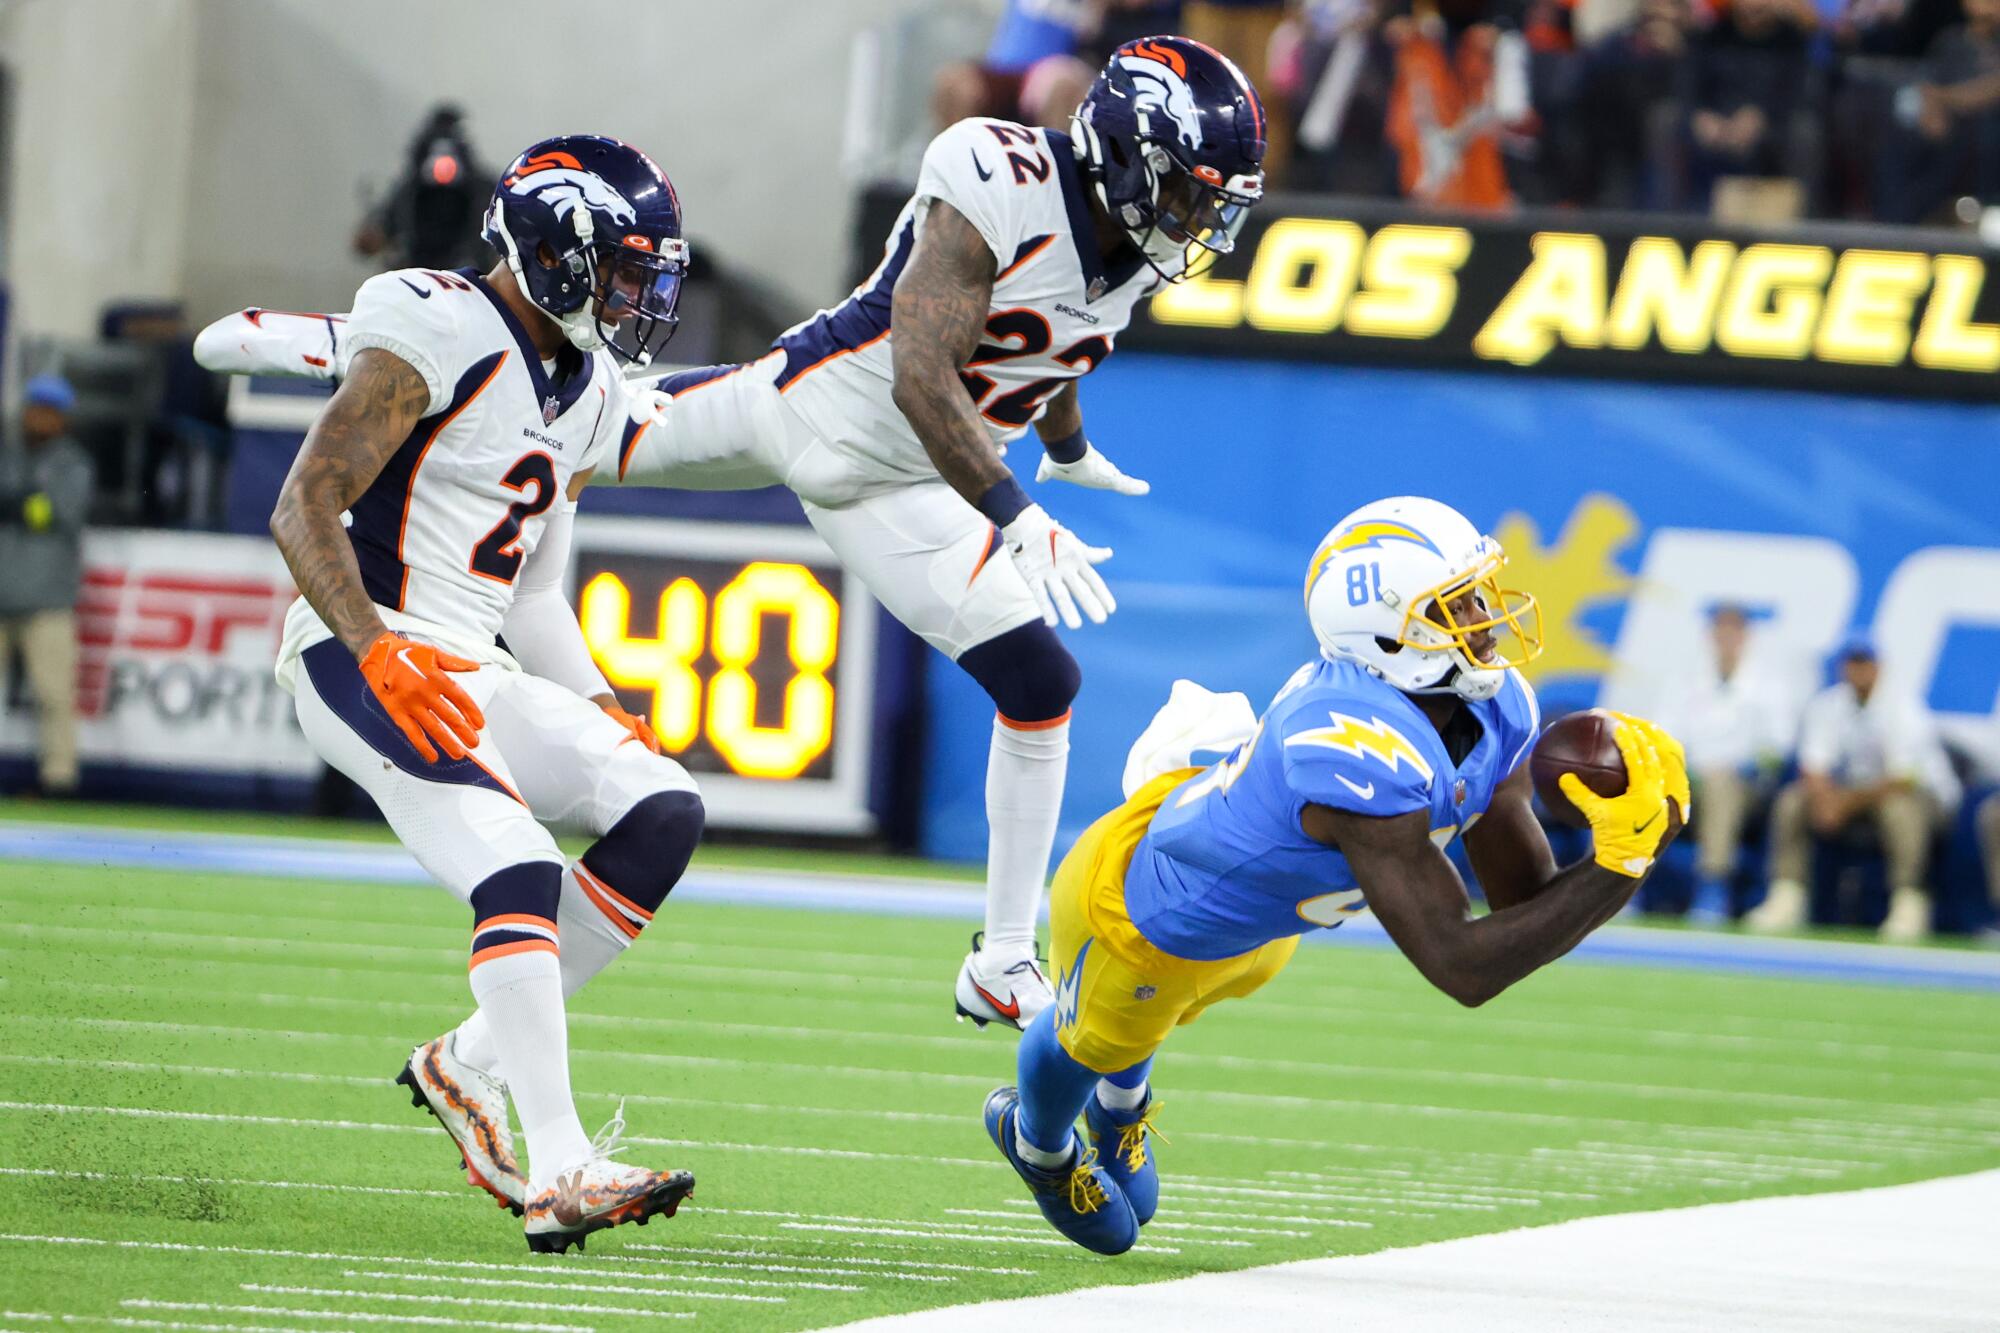 Chargers wide receiver Mike Williams is ruled out of bounds after hauling in a pass in overtime.